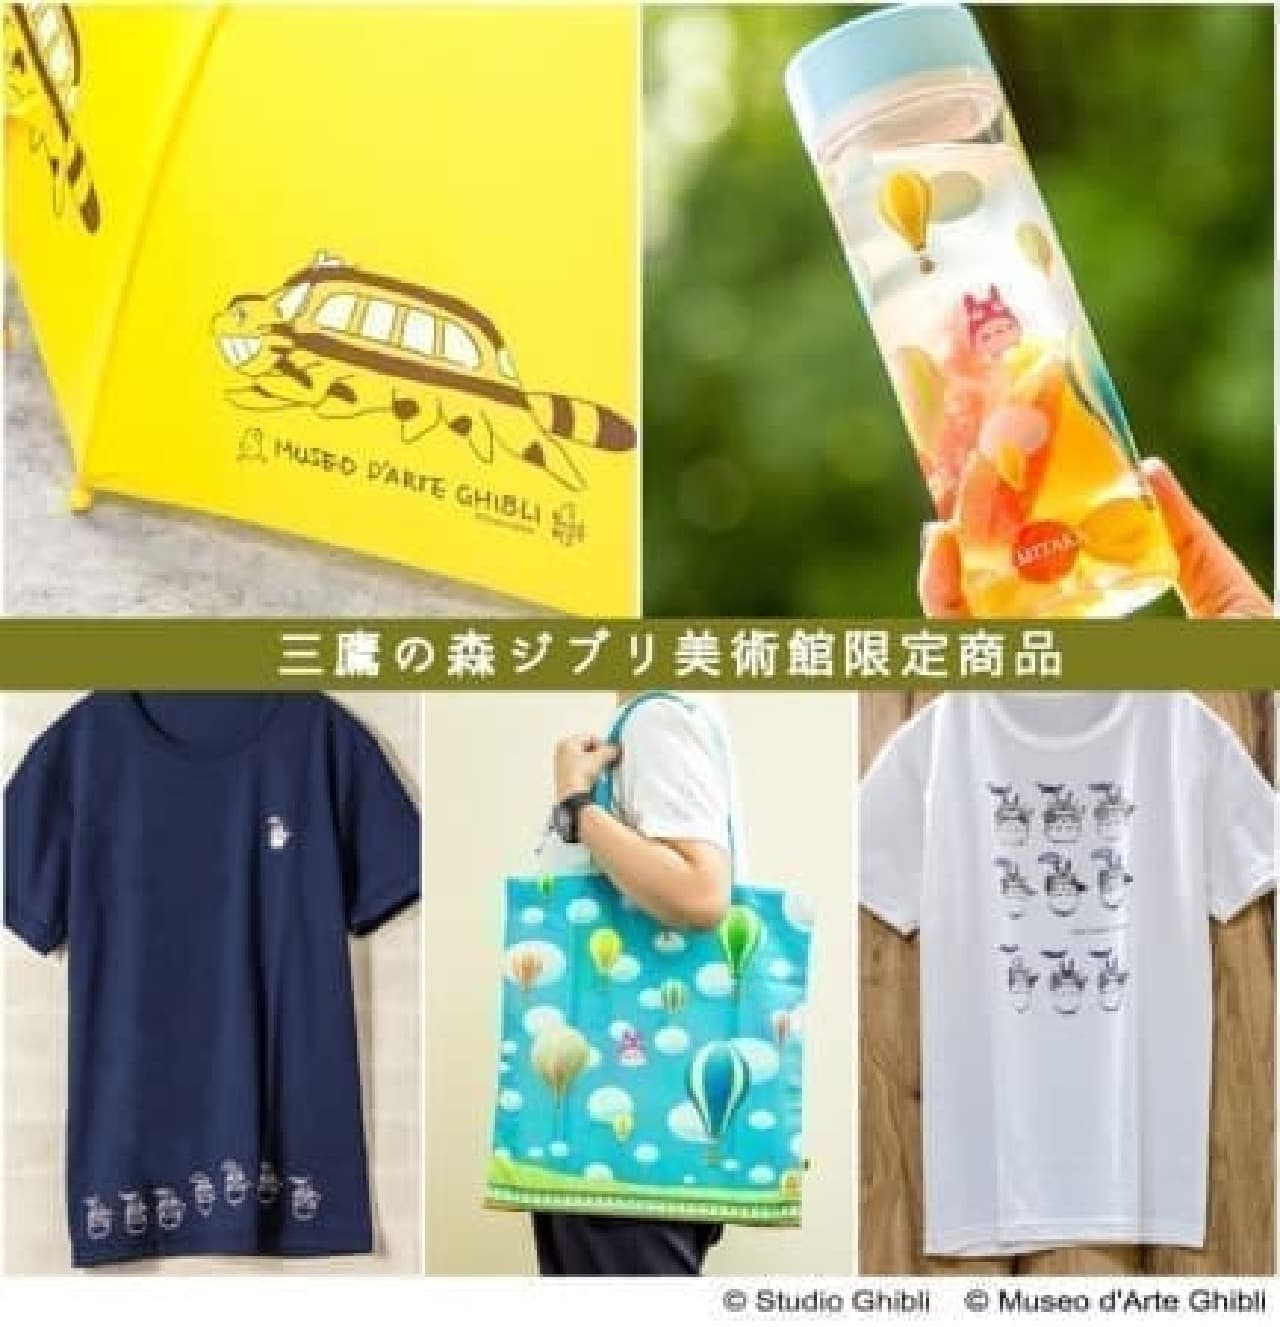 Five products limited to the Ghibli Museum, Mitaka are now available online at the "Donguri Republic" --Totoro T-shirts, catbus umbrellas, etc.